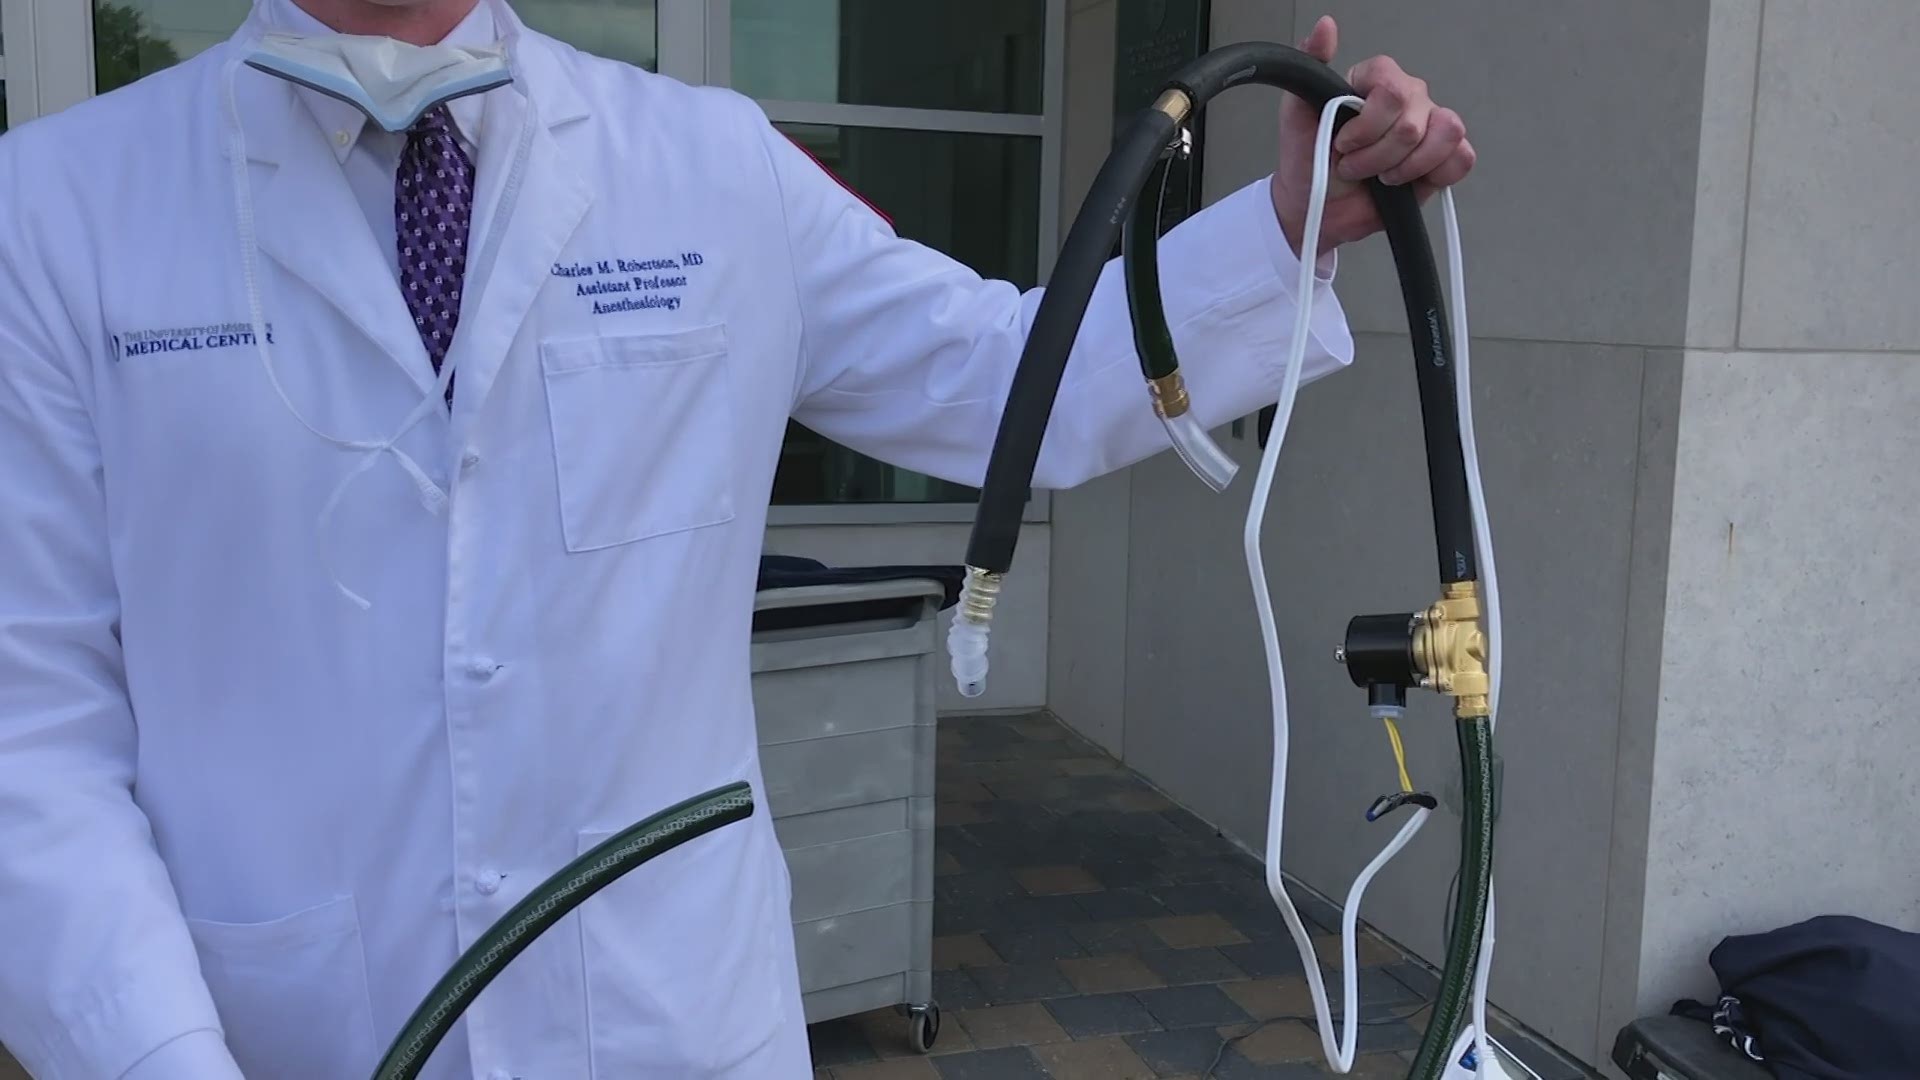 An anesthesiology professor says he's designed a "last resort" ventilator he hopes can alleviate a supply shortage during the COVID-19 pandemic.